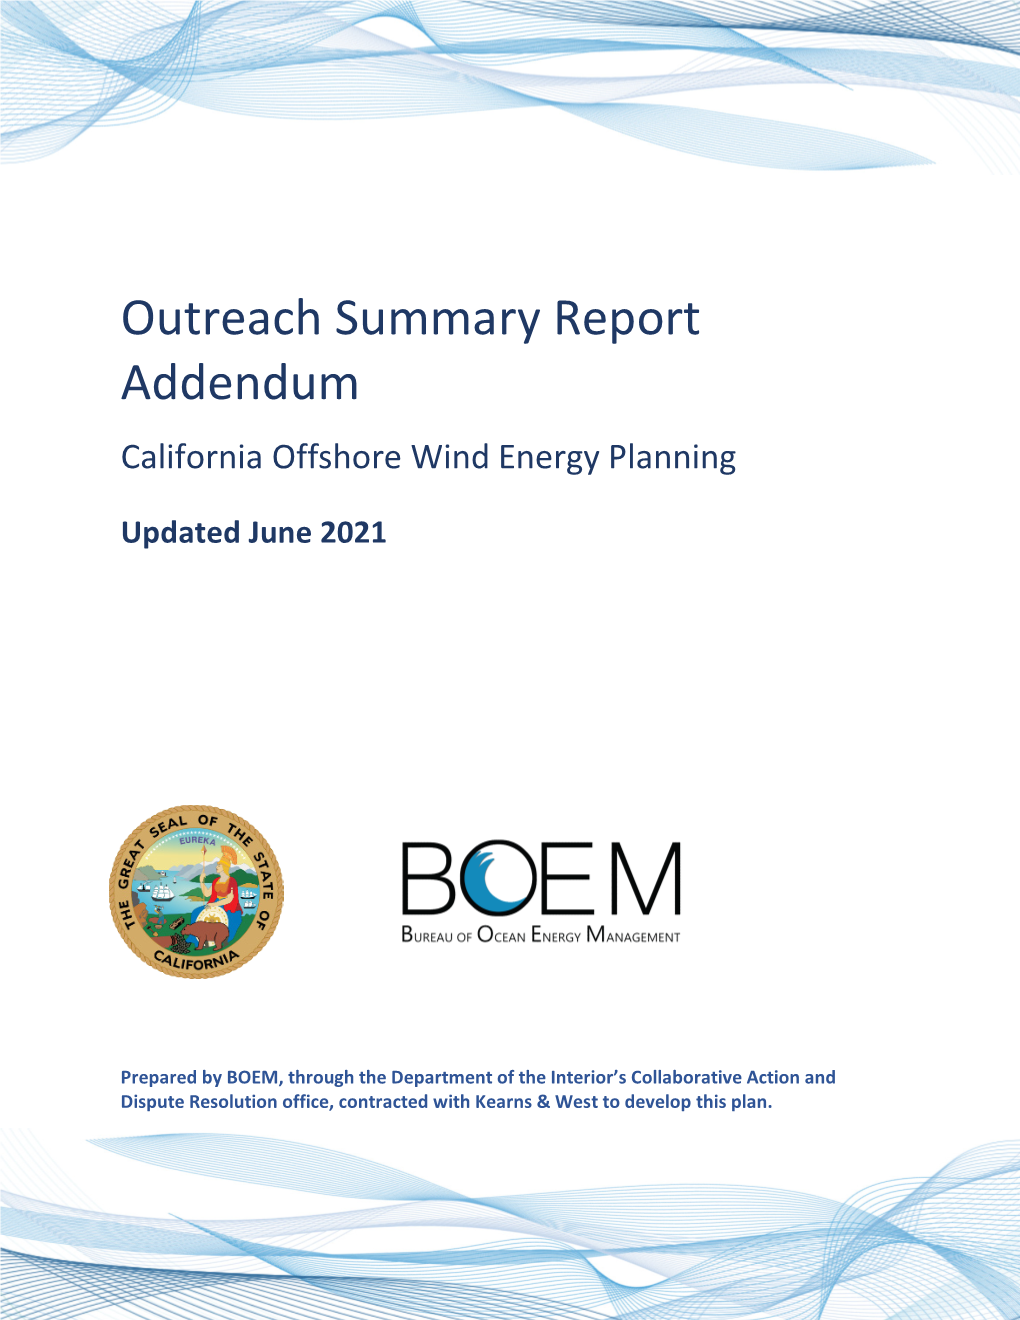 Outreach Summary Report Addendum: California Offshore Wind Energy Planning 1 | Page